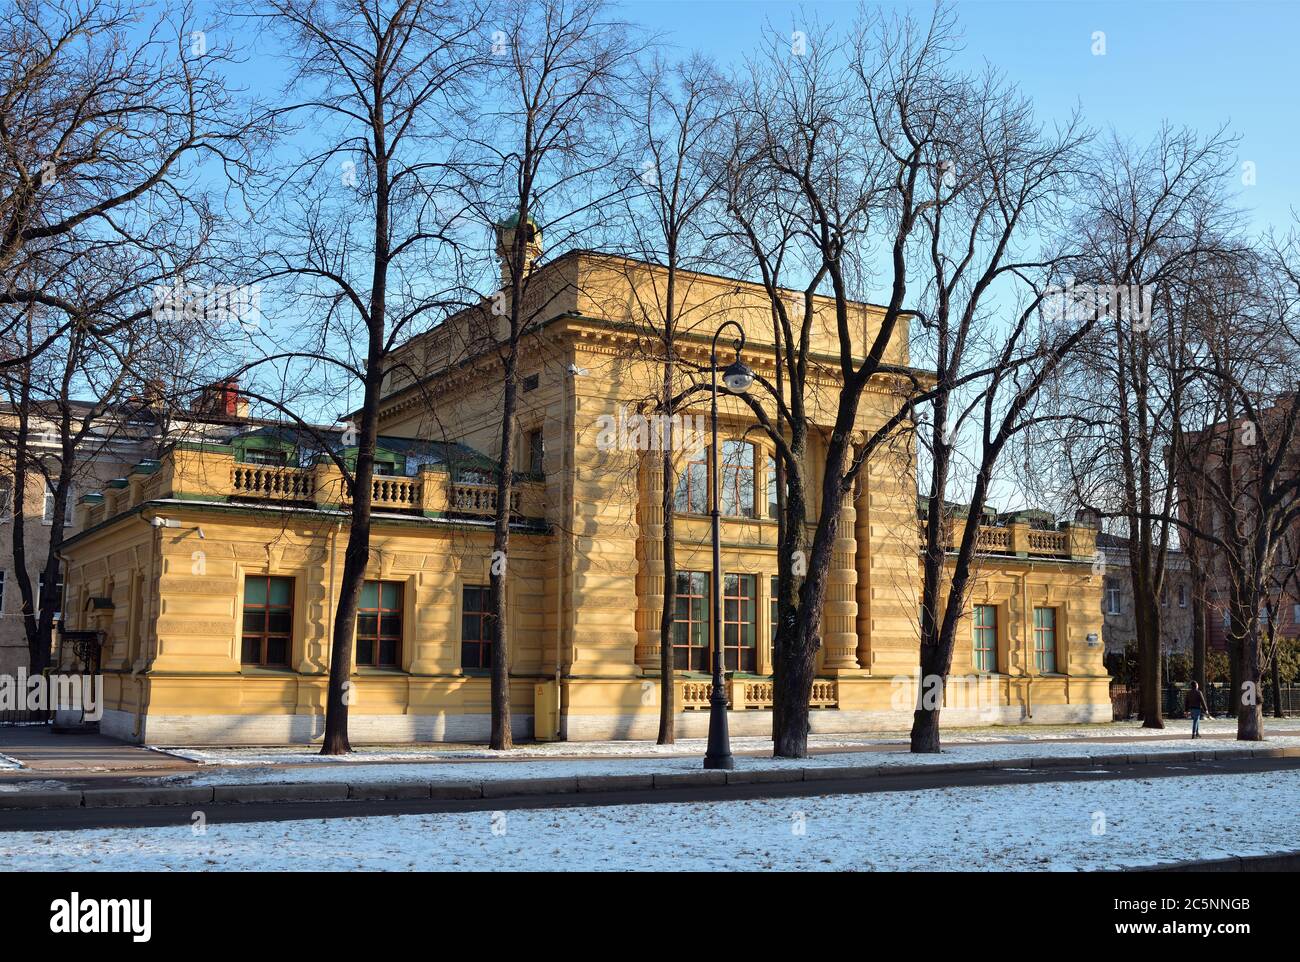 Historic city architecture. The building of the educational power station of the Nikolaev Engineering Academy in Saint Petersburg shown at winter suns Stock Photo